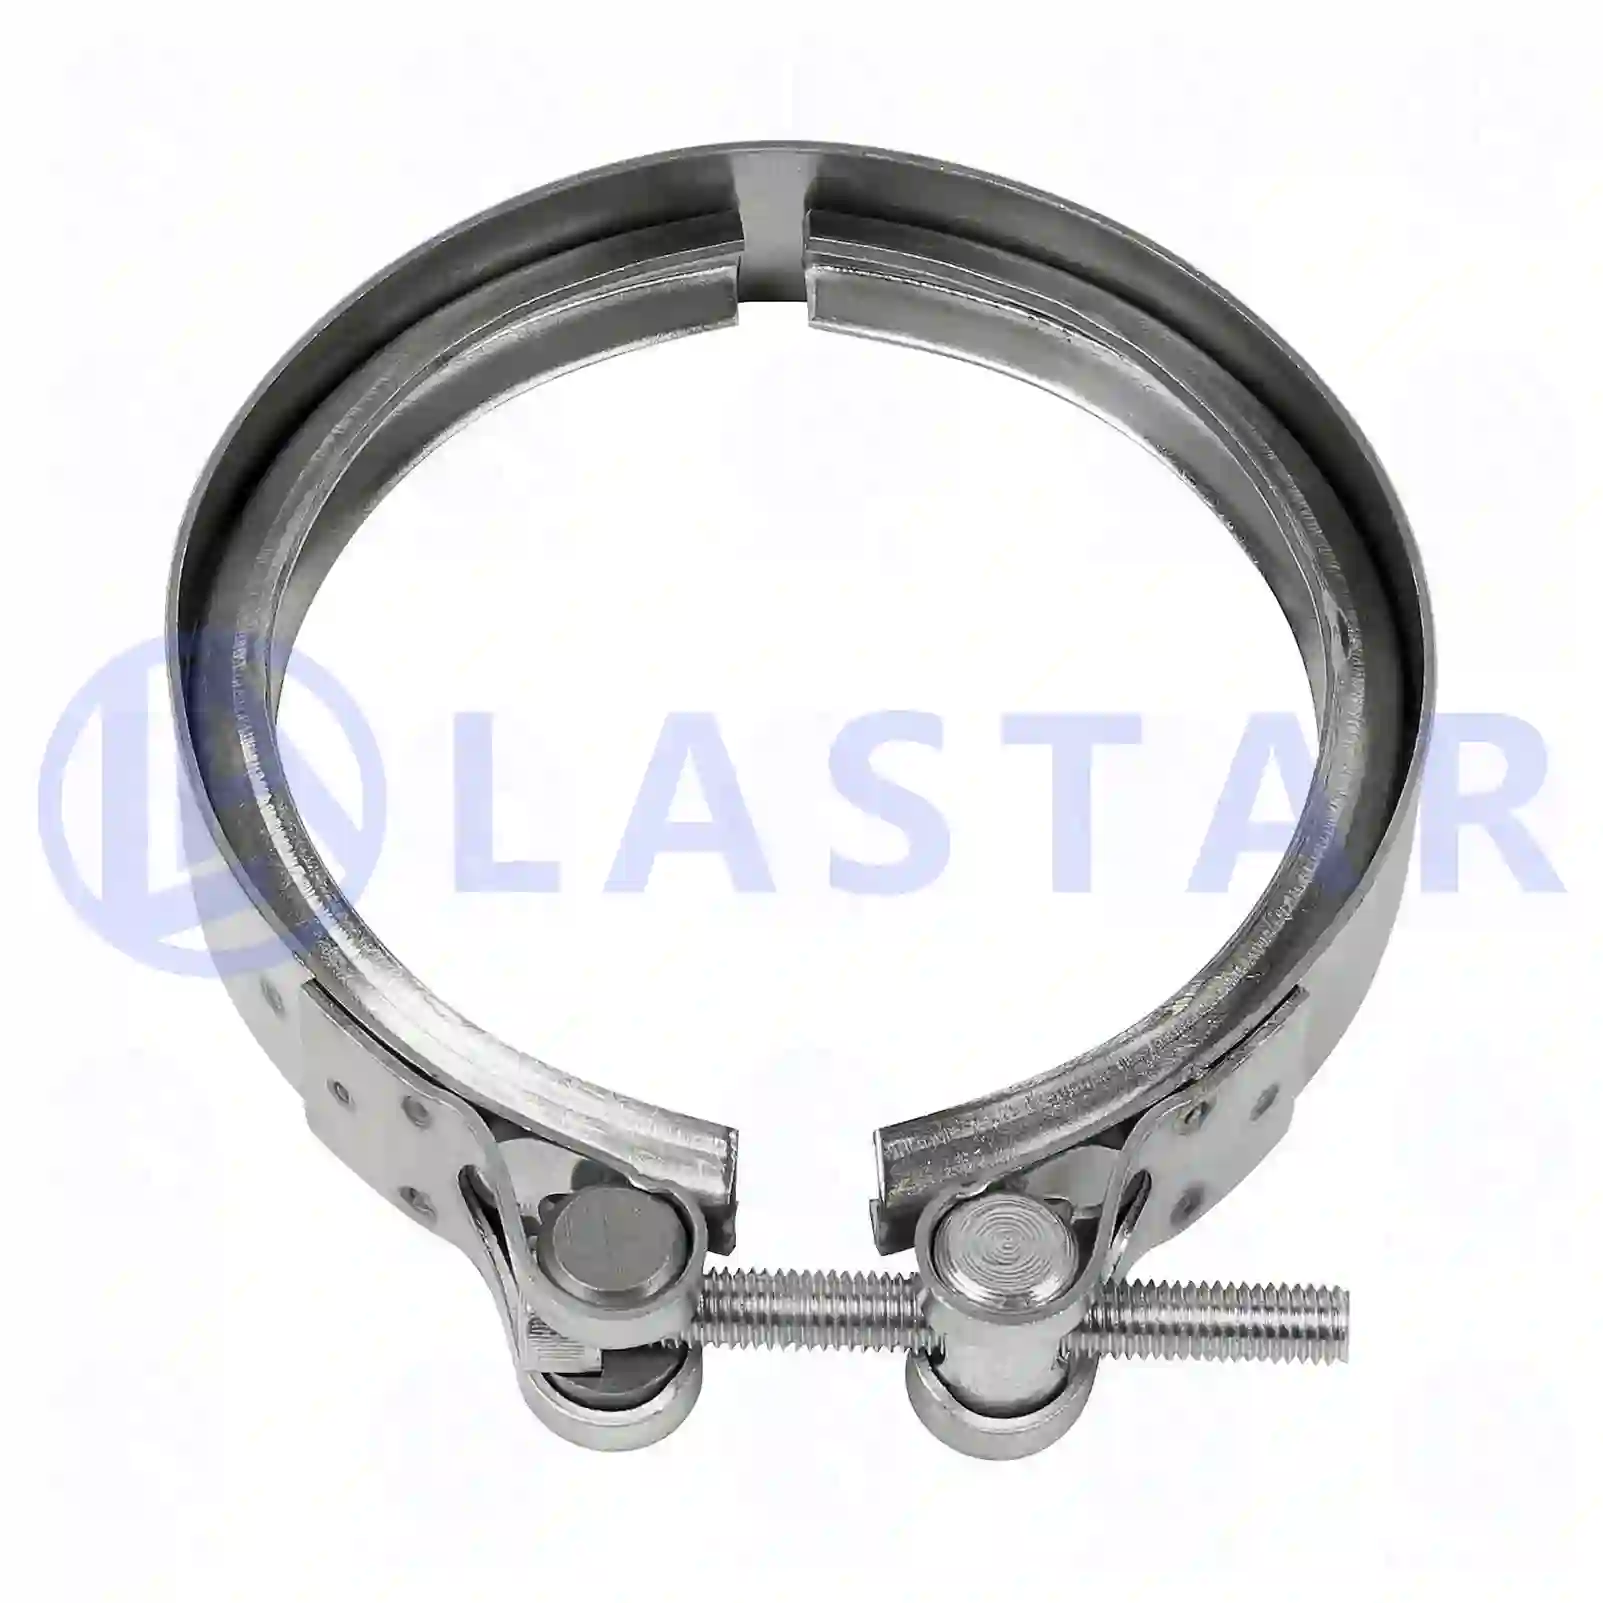 Clamp, 77704719, 1352668, 1371086, 1392945, 1404763, 1433190, ZG00323-0008 ||  77704719 Lastar Spare Part | Truck Spare Parts, Auotomotive Spare Parts Clamp, 77704719, 1352668, 1371086, 1392945, 1404763, 1433190, ZG00323-0008 ||  77704719 Lastar Spare Part | Truck Spare Parts, Auotomotive Spare Parts